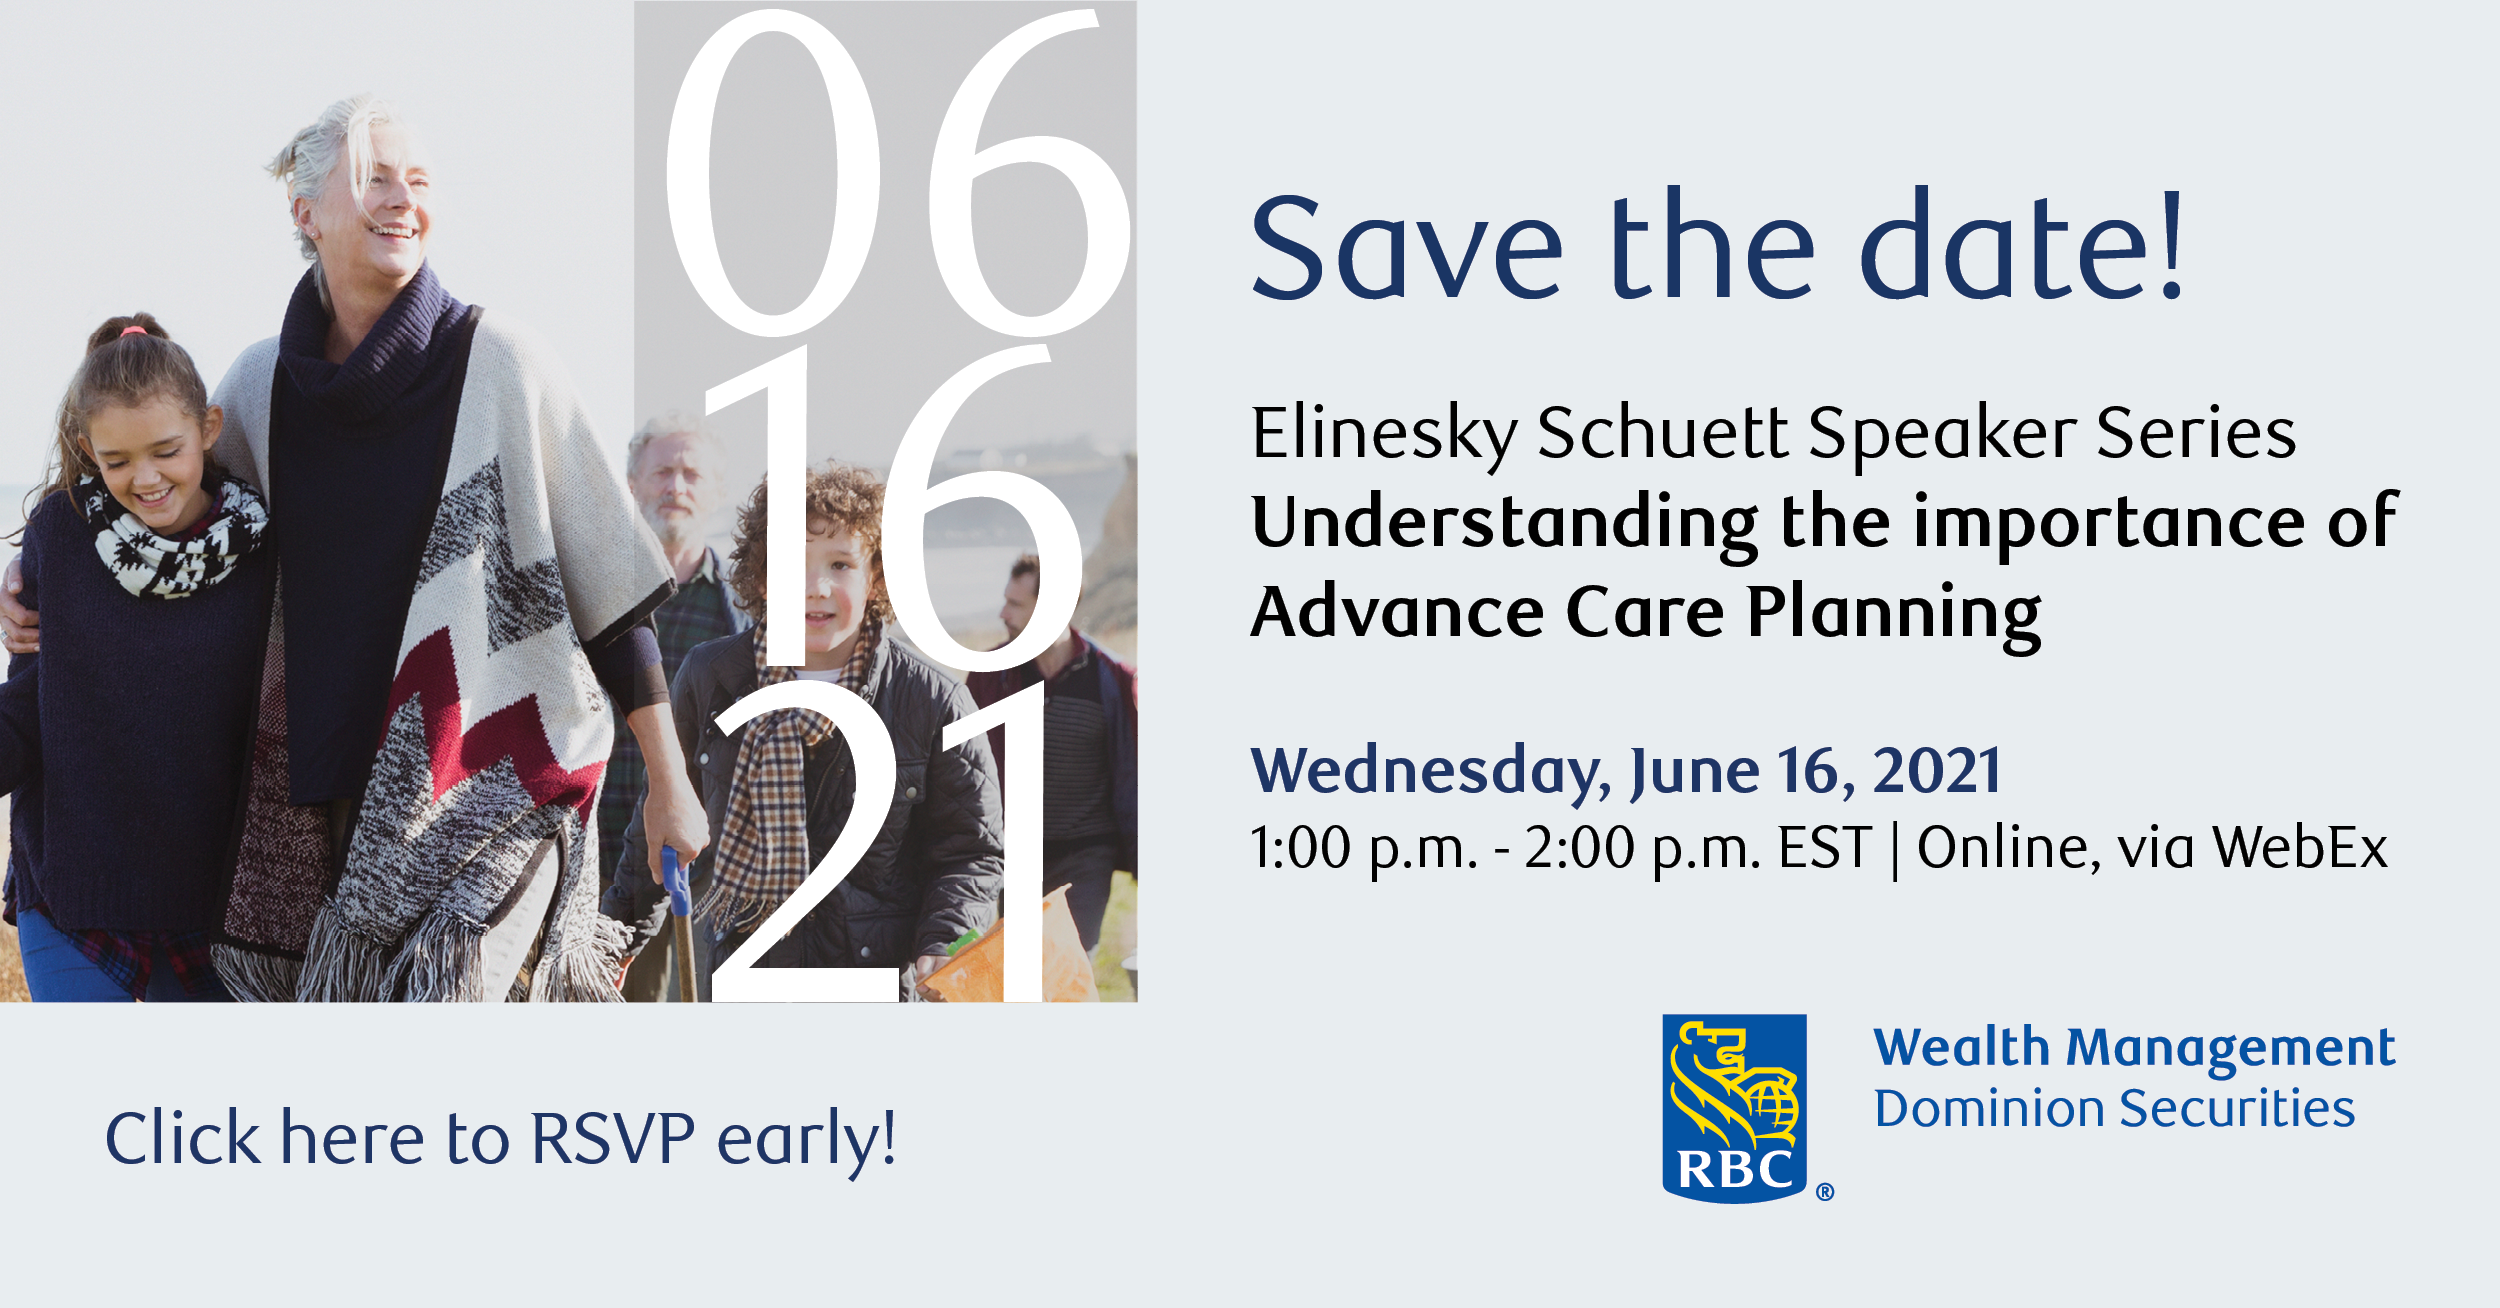 Save the Date. Elinesky Schuett Speaker Series. Understanding the importance of Advance Care Planning. June 16, 1 p.m. - 2 p.m., online via WebEx. Click here to RSVP early. 